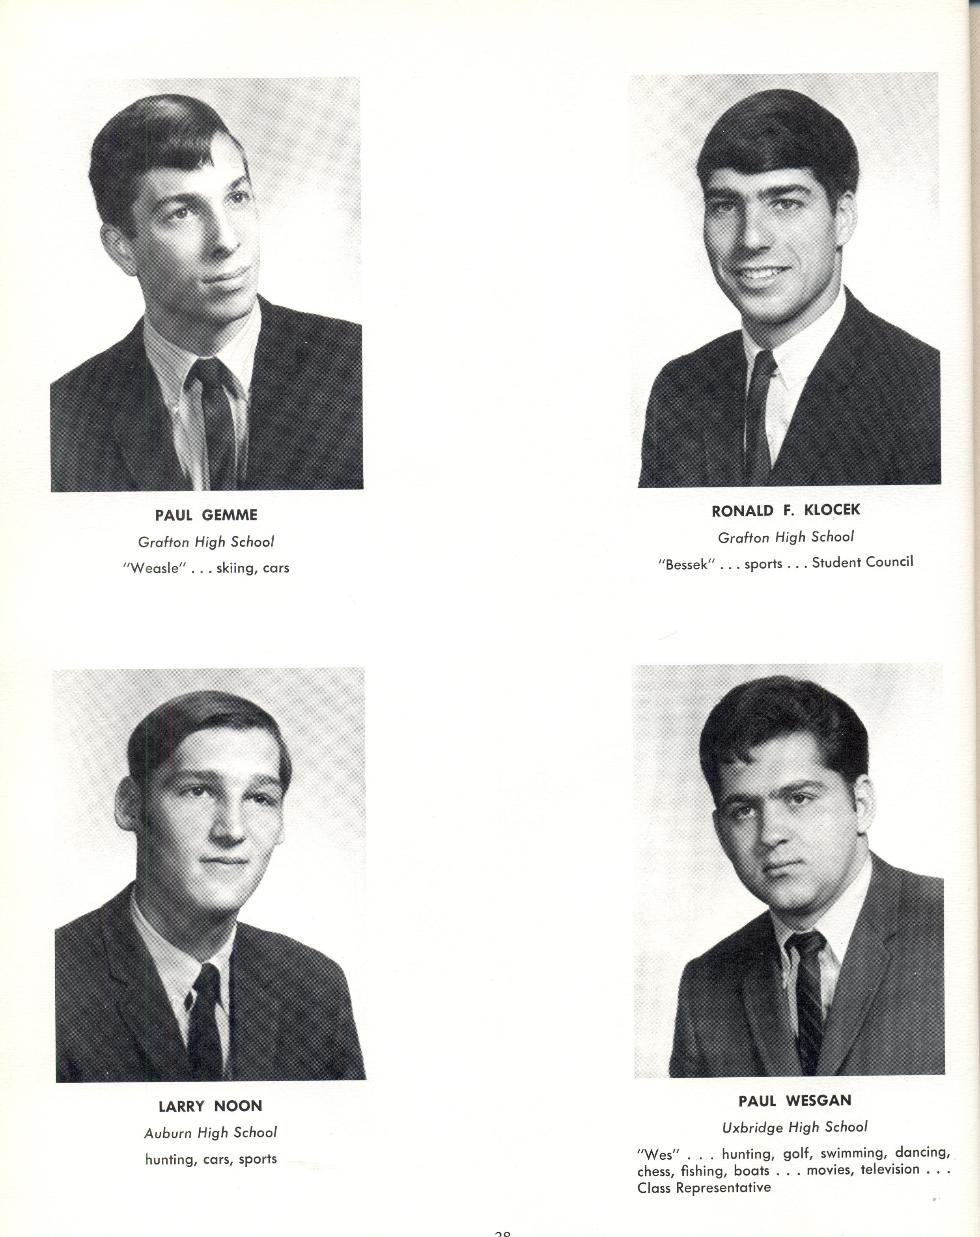 Worcester Industrial Technical Institute - Class of 1969 - Electrical Power Technology